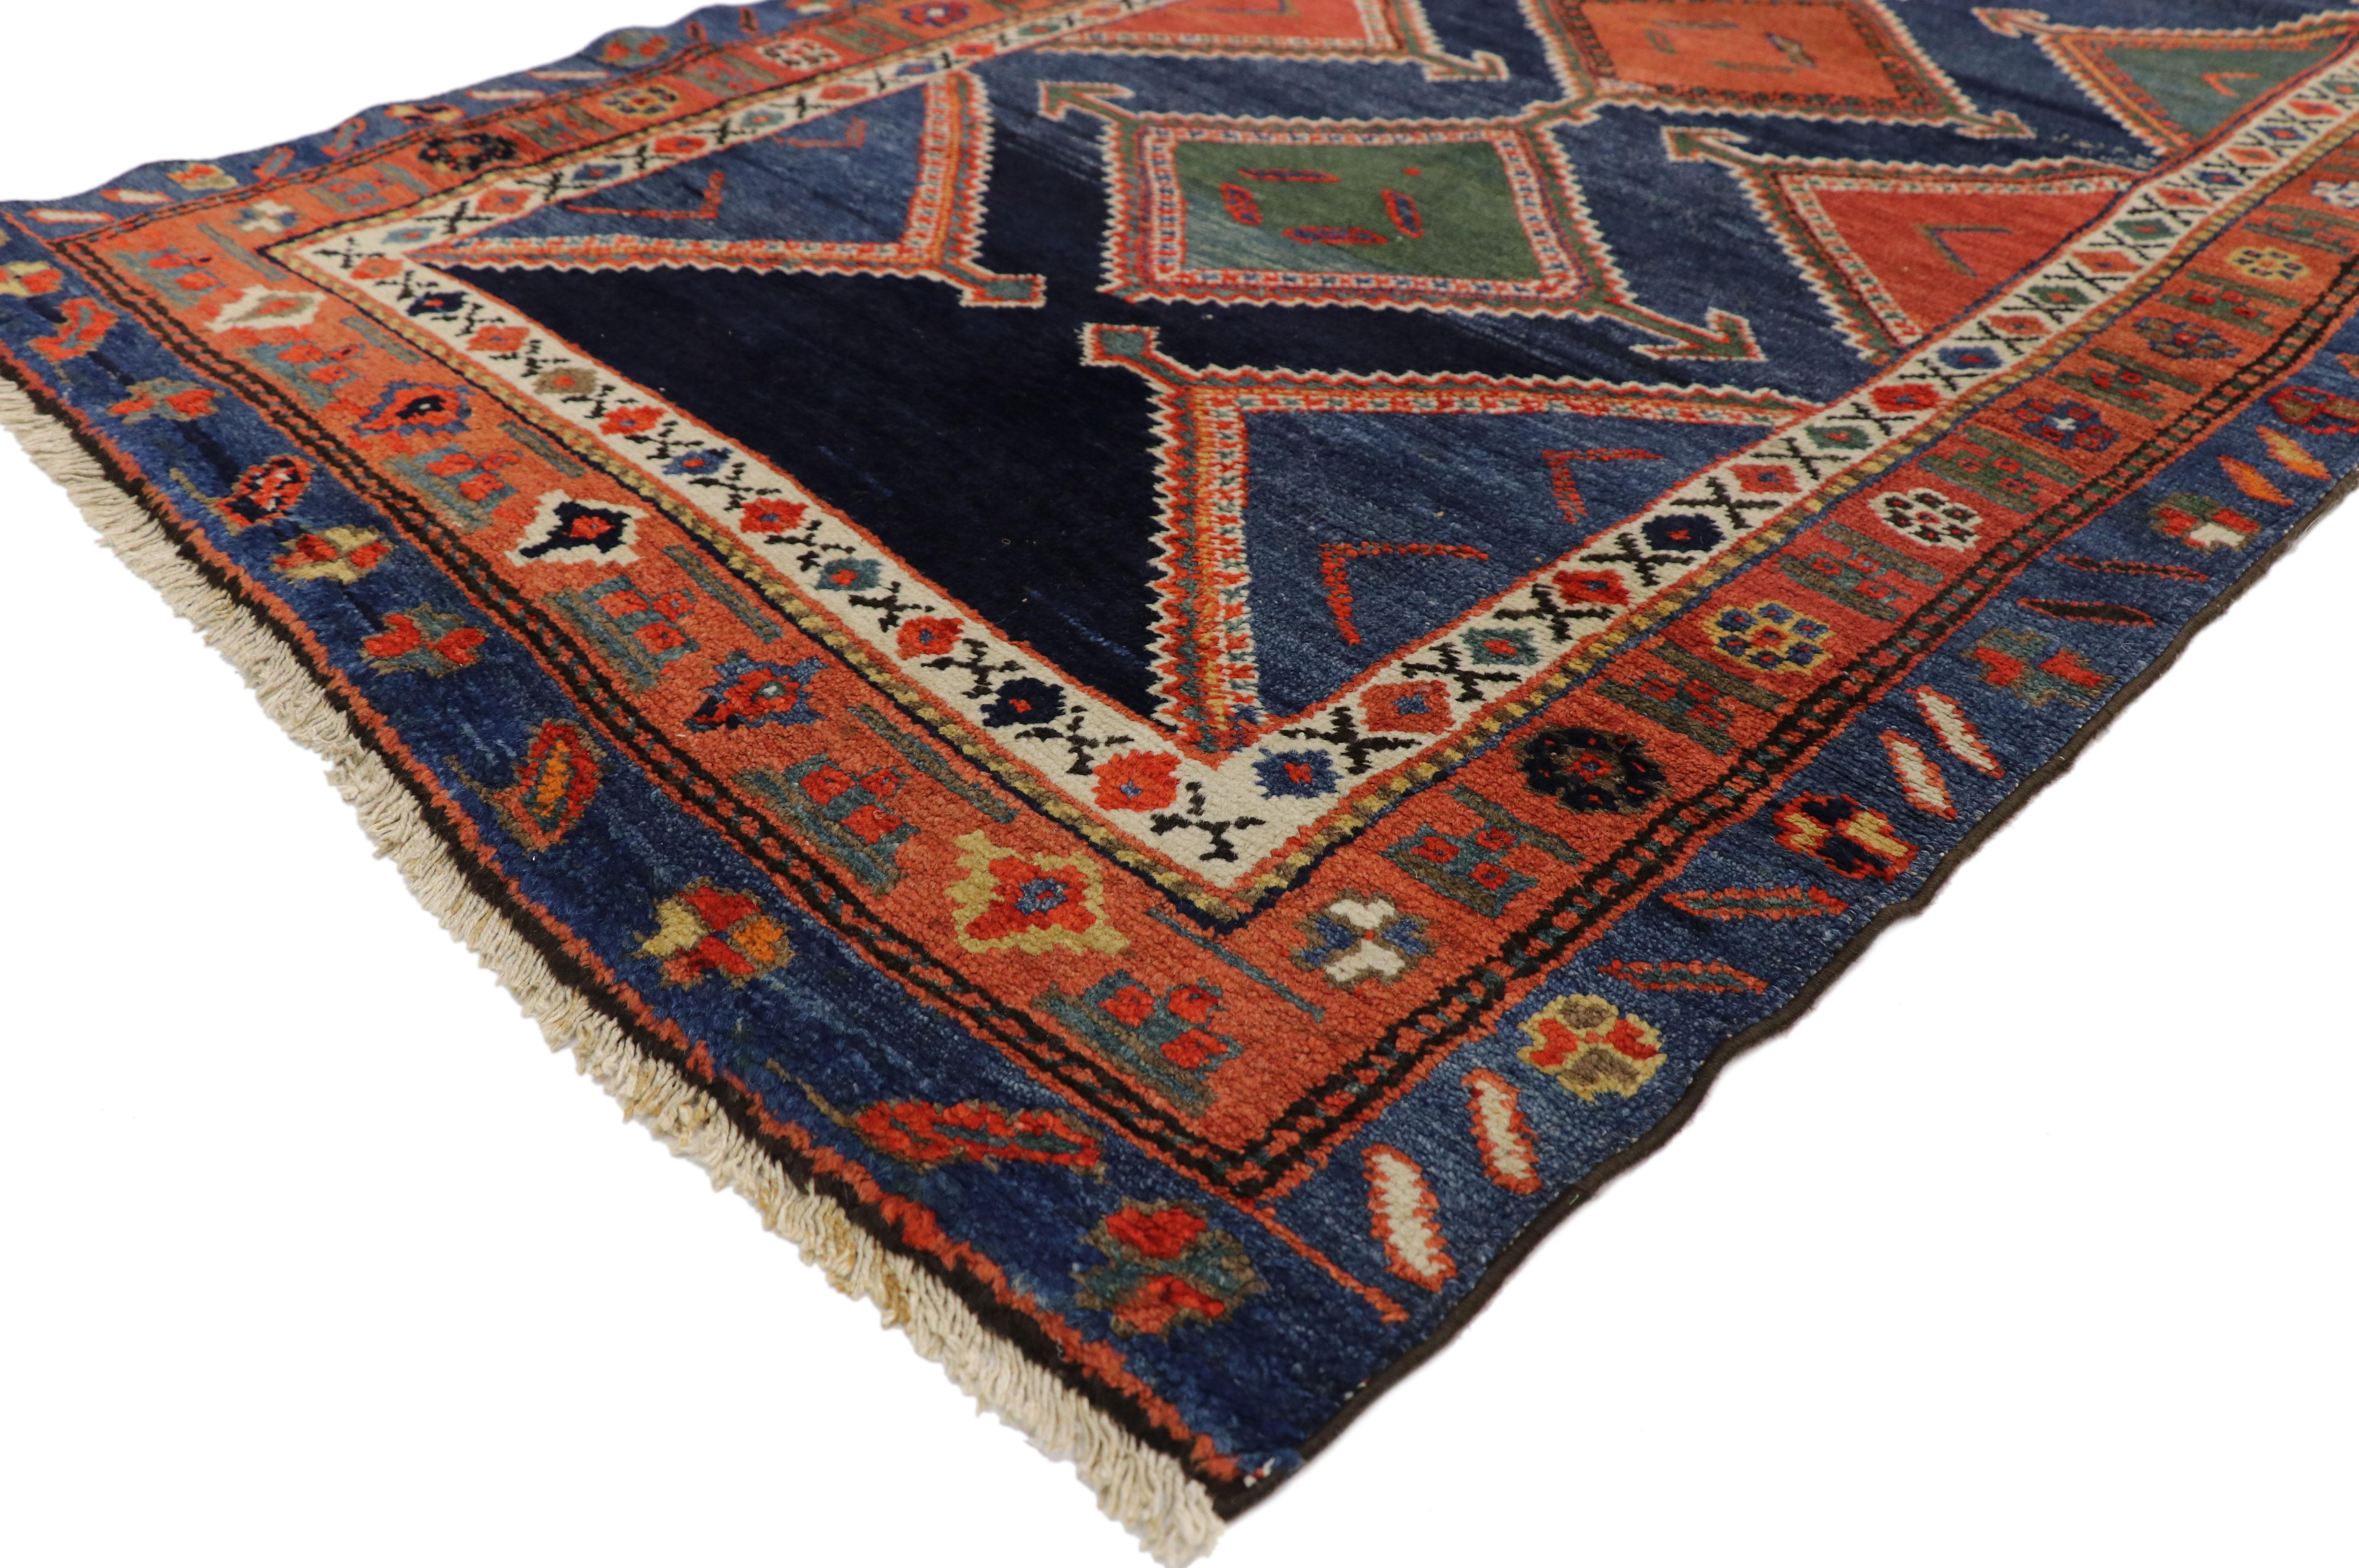 73325, antique Persian Hamadan Chenar runner, long hallway runner. Bright and dynamic with visual appeal, this hand knotted wool antique Persian Hamadan Chenar hallway runner features a pole medallion composed of an alternating row of stepped